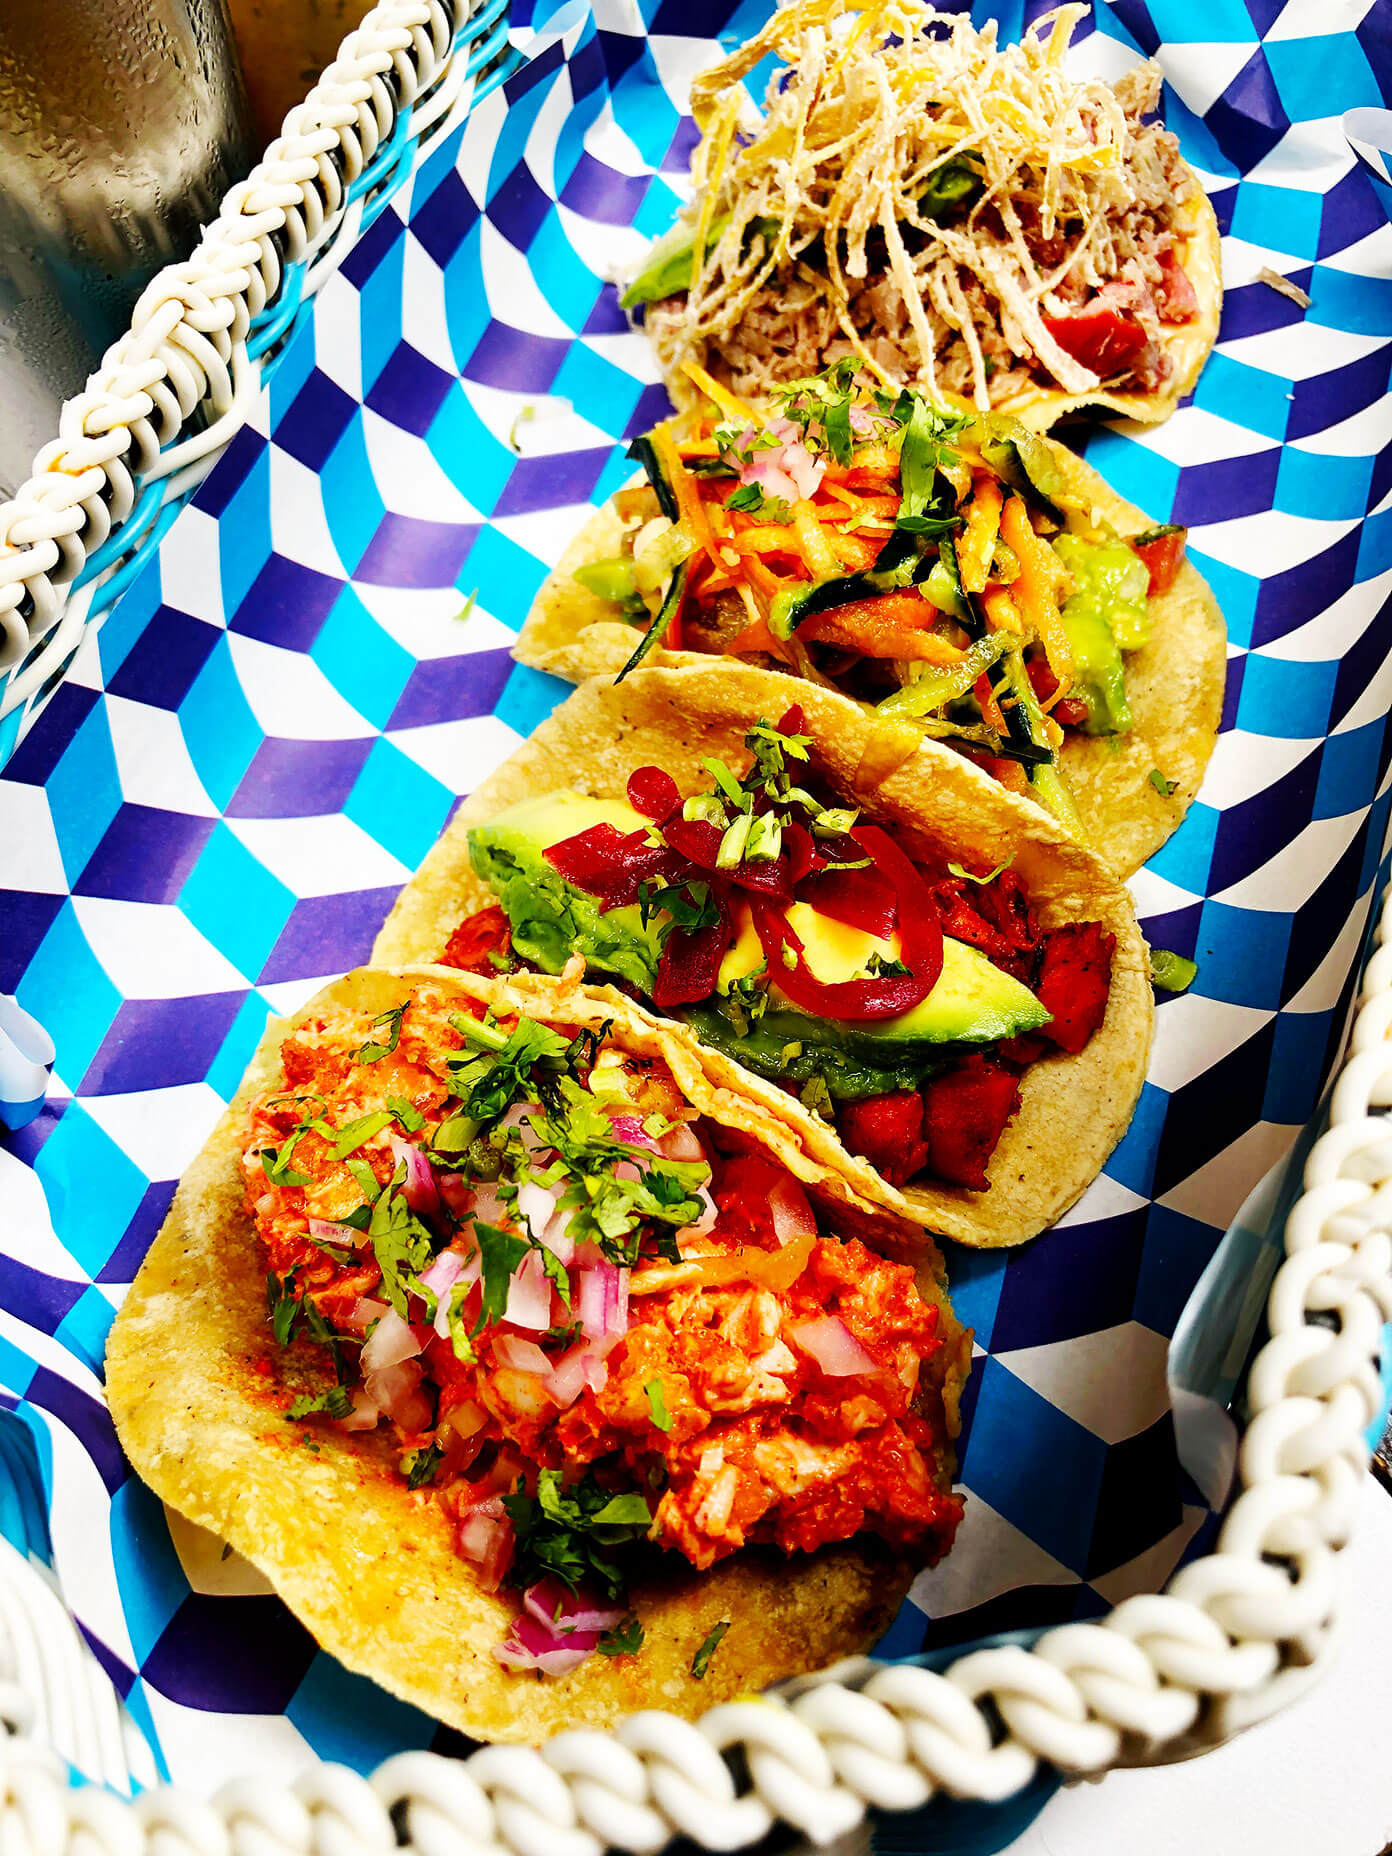 Fish Tacos at Tres Galeones | Ali's Guide To Mexico City